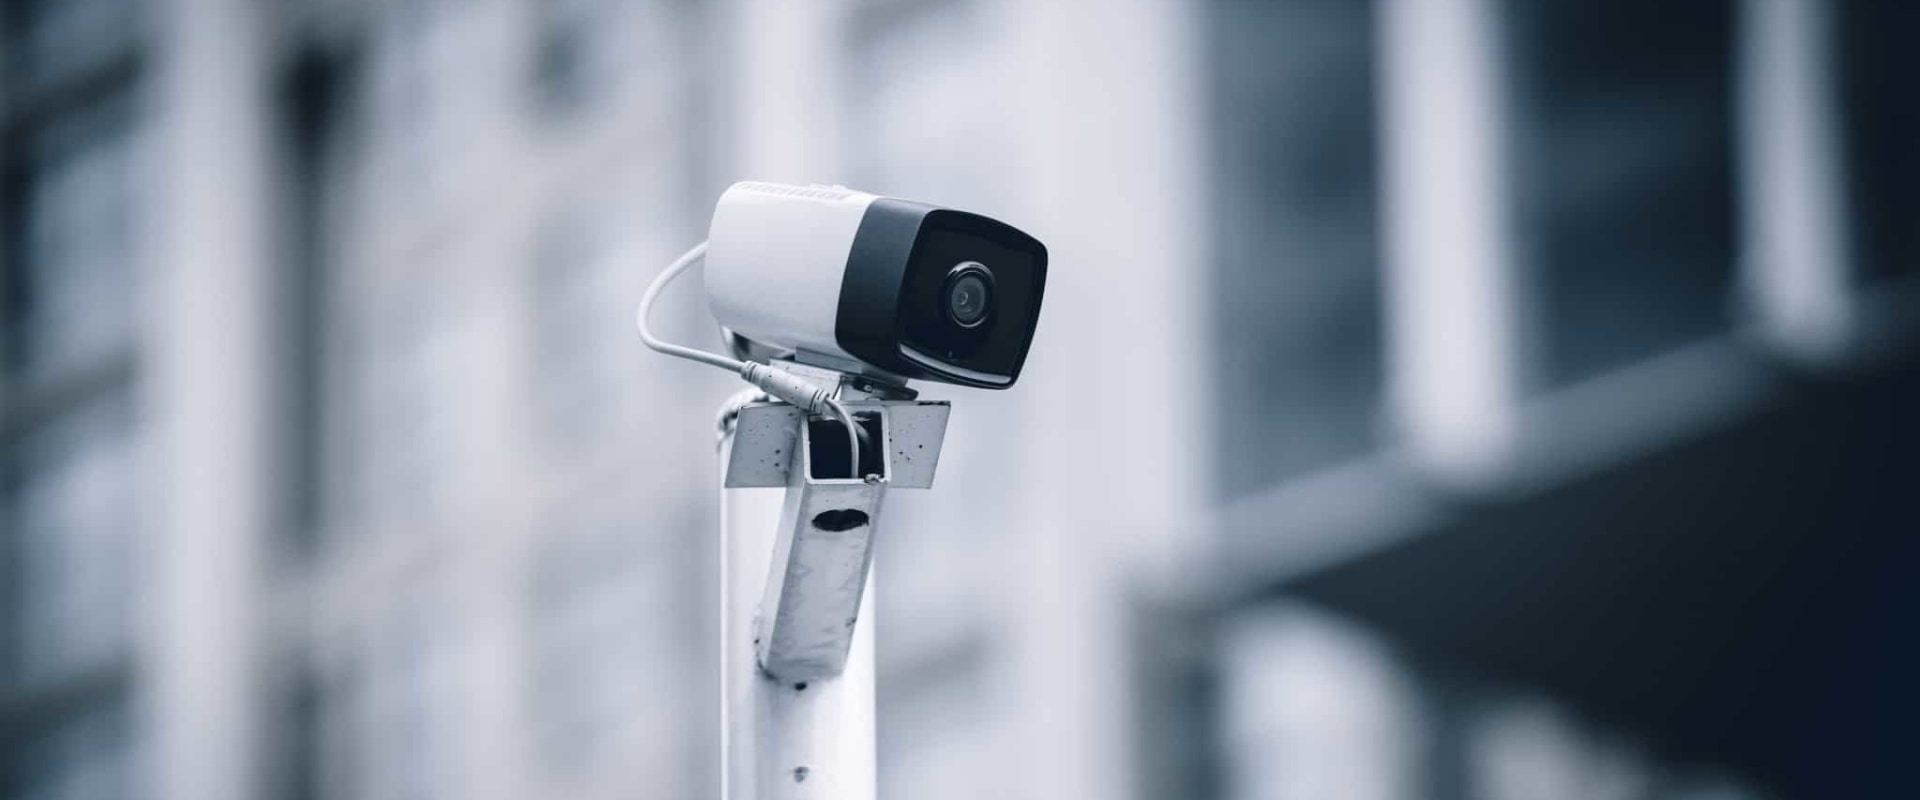 Features and Benefits of Network CCTV Cameras